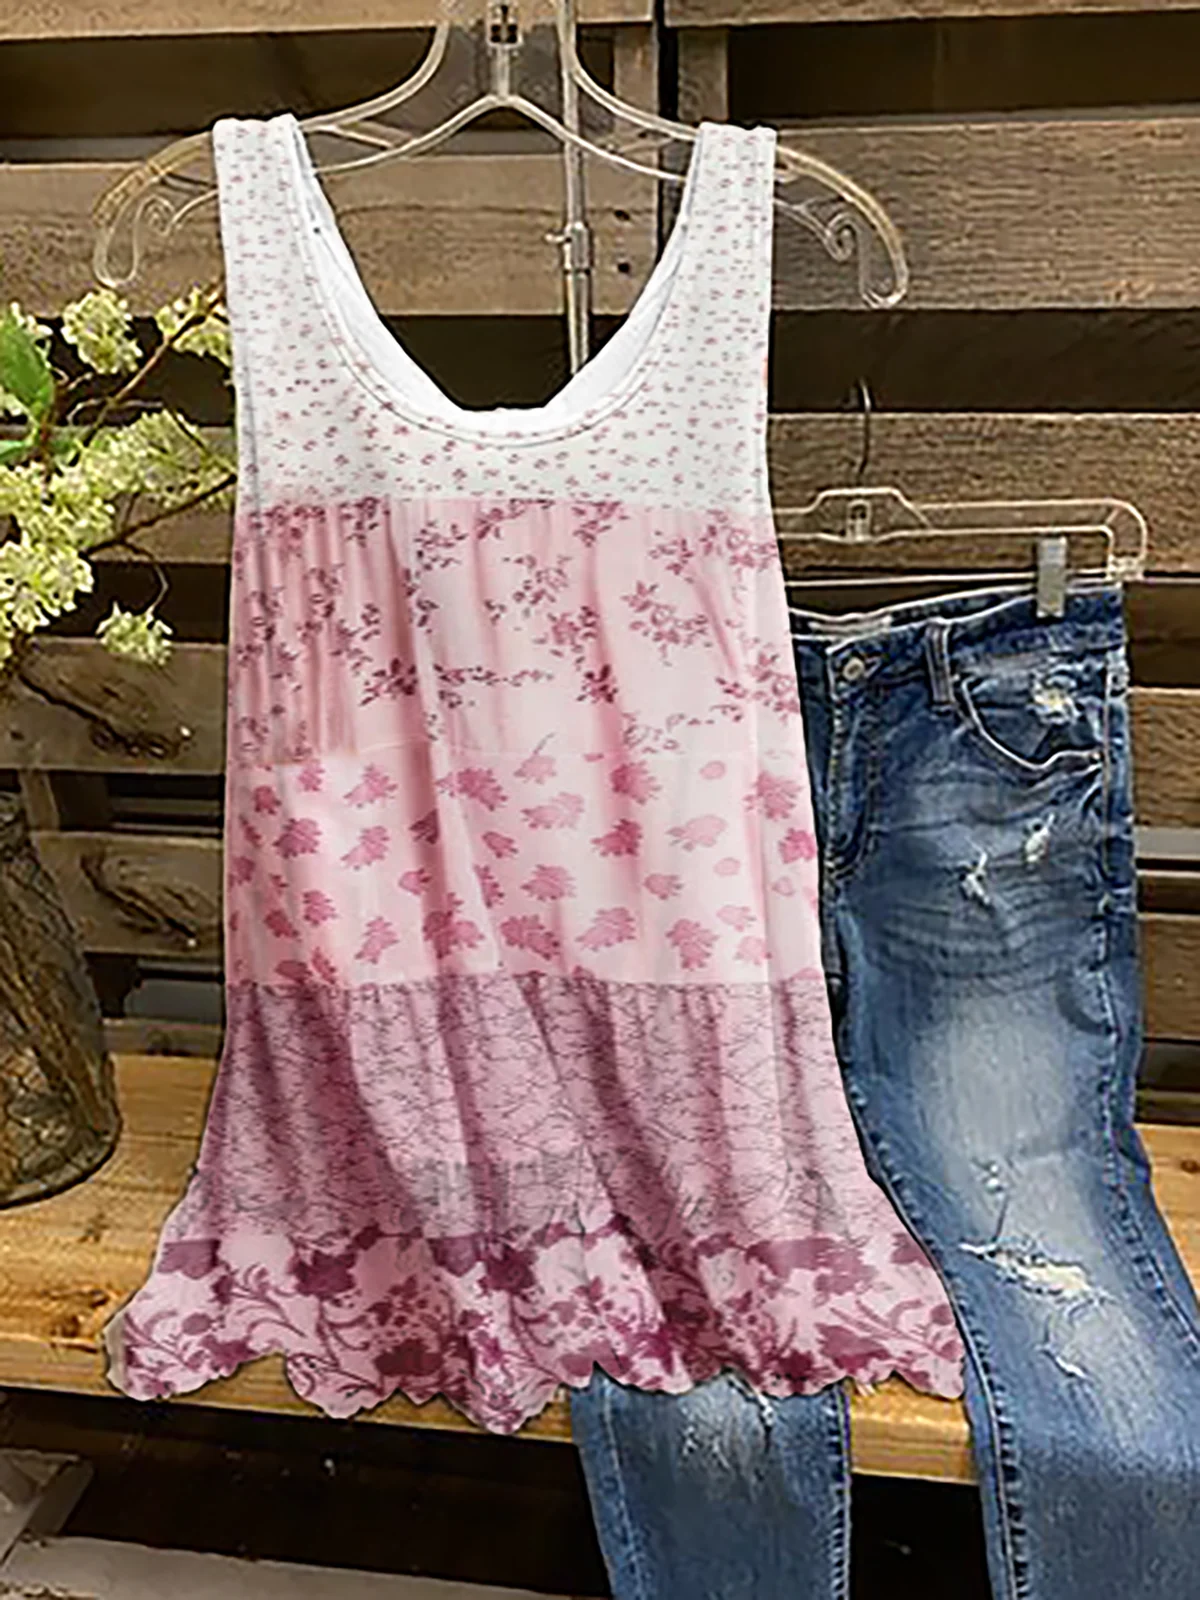 Floral Sleeveless Top